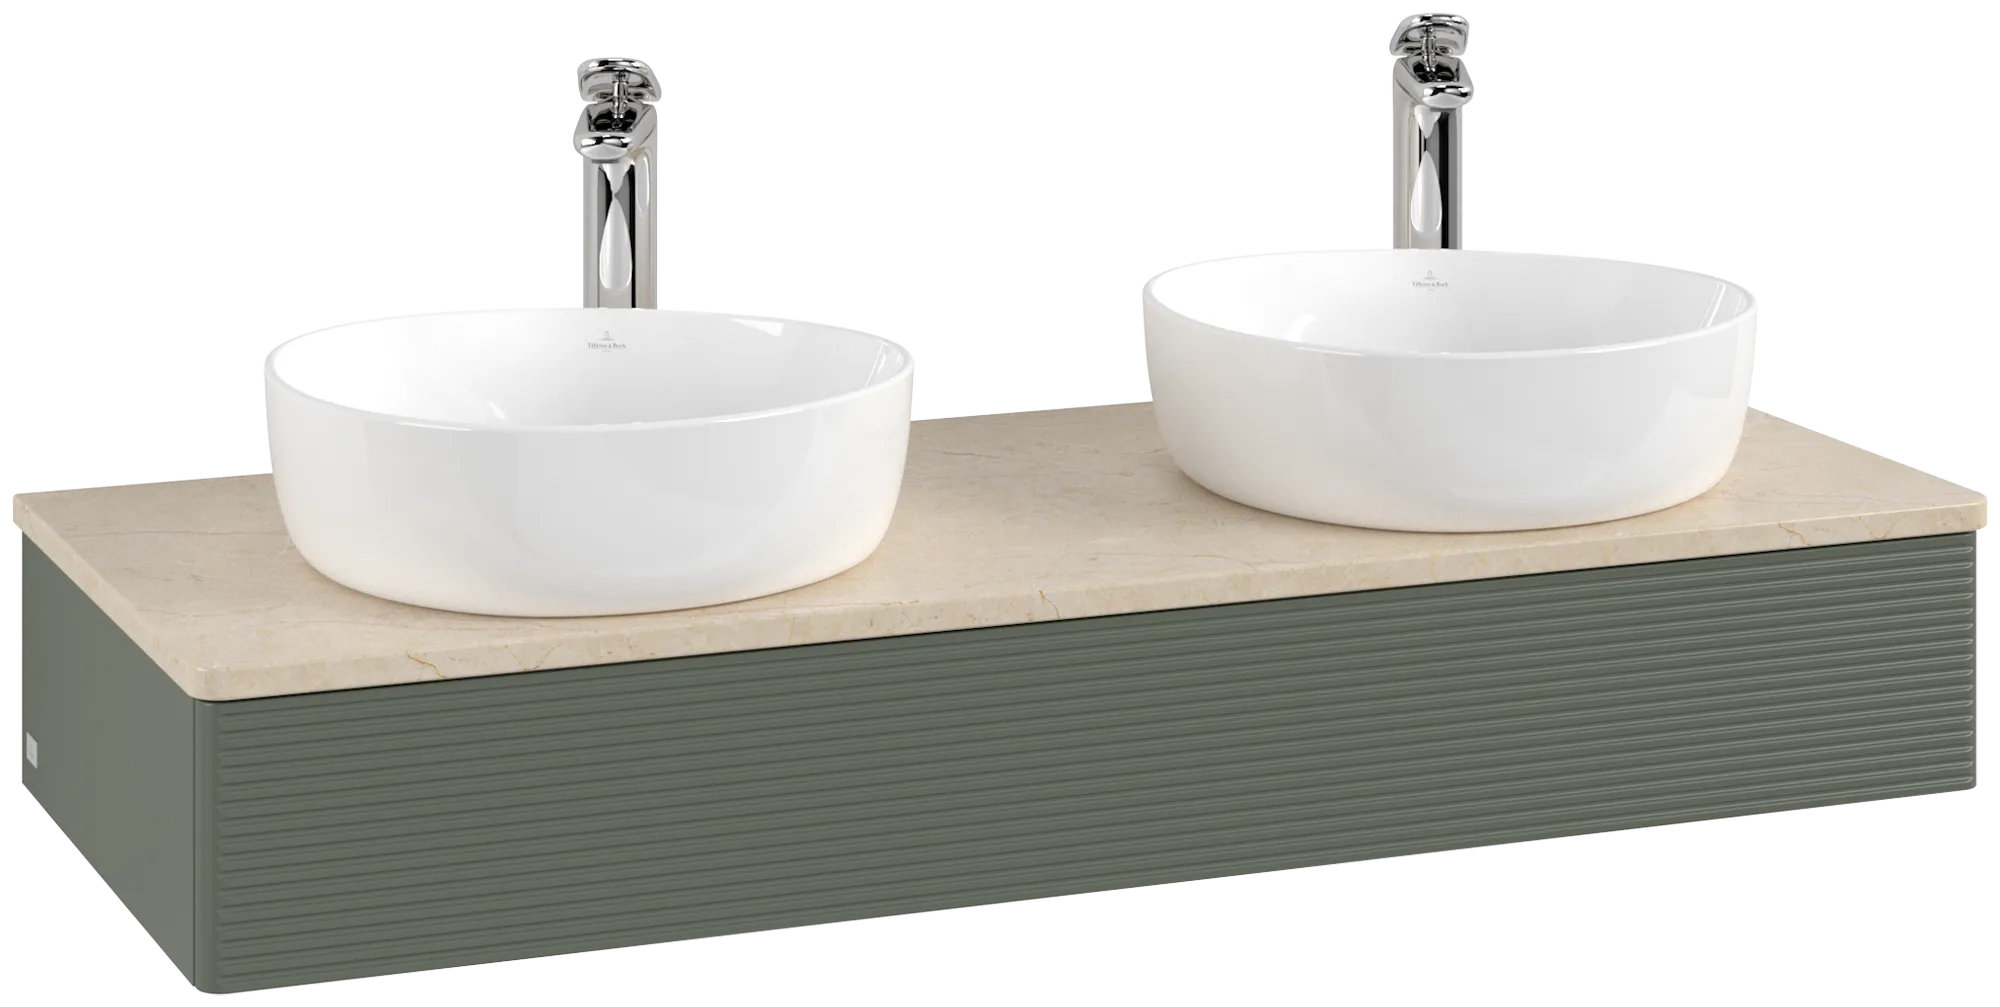 Picture of VILLEROY BOCH Antao Vanity unit, 1 pull-out compartment, 1200 x 190 x 500 mm, Front with grain texture, Leaf Green Matt Lacquer / Botticino #K13153HL